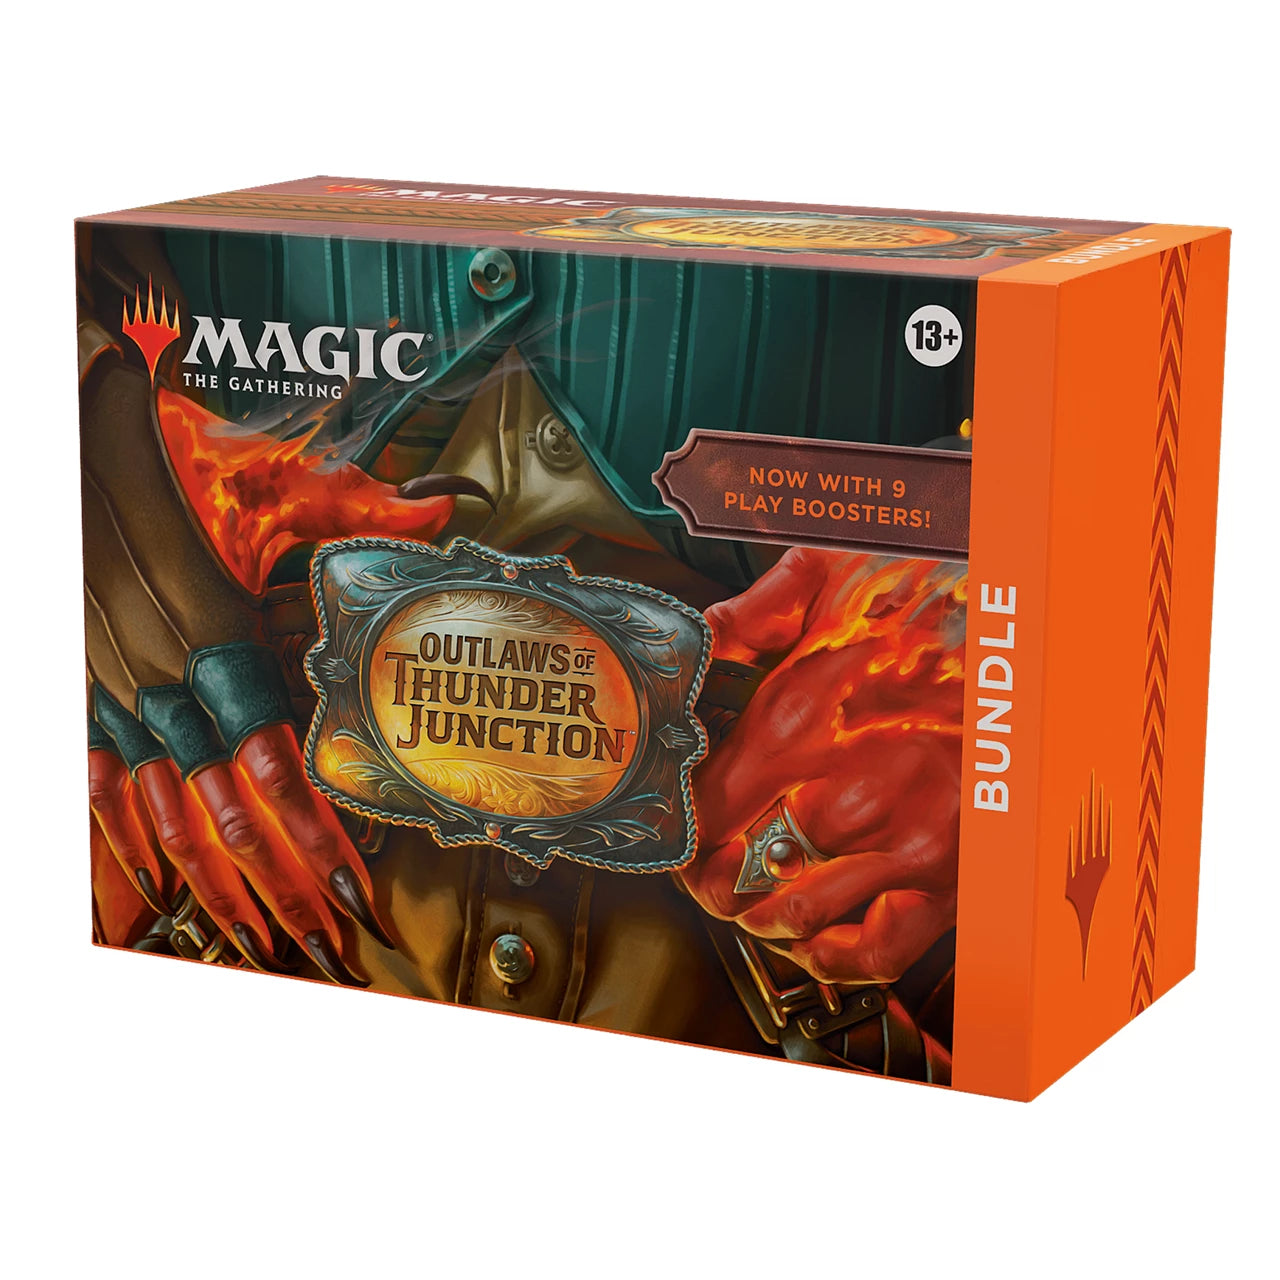 Magic: The Gathering - Outlaws of Thunder Junction Bundle - Release Date 19/4/24 - Loaded Dice